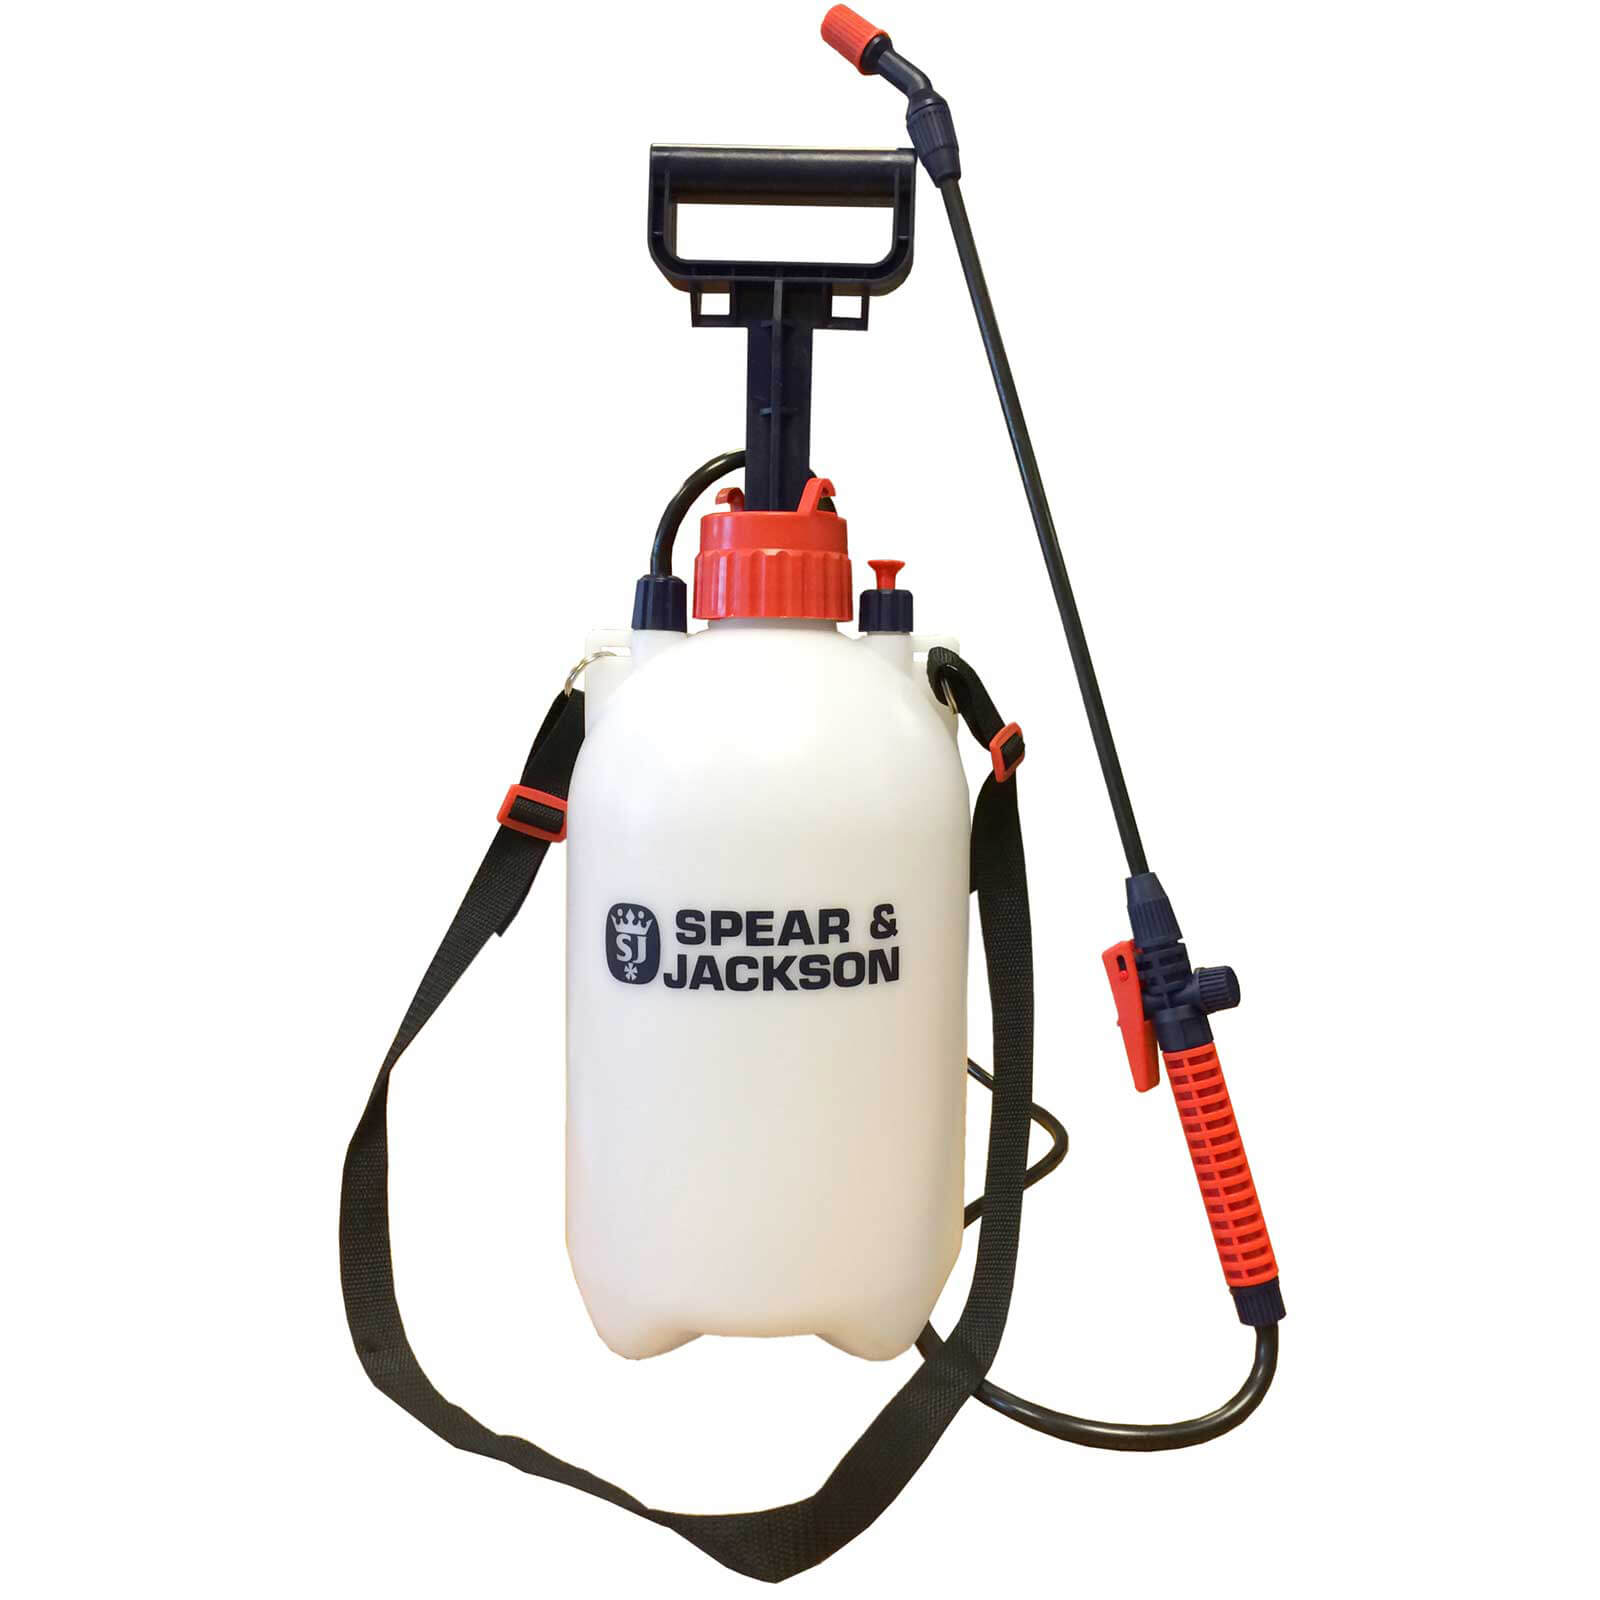 Image of Spear and Jackson Pump Action Pressure Sprayer 5l